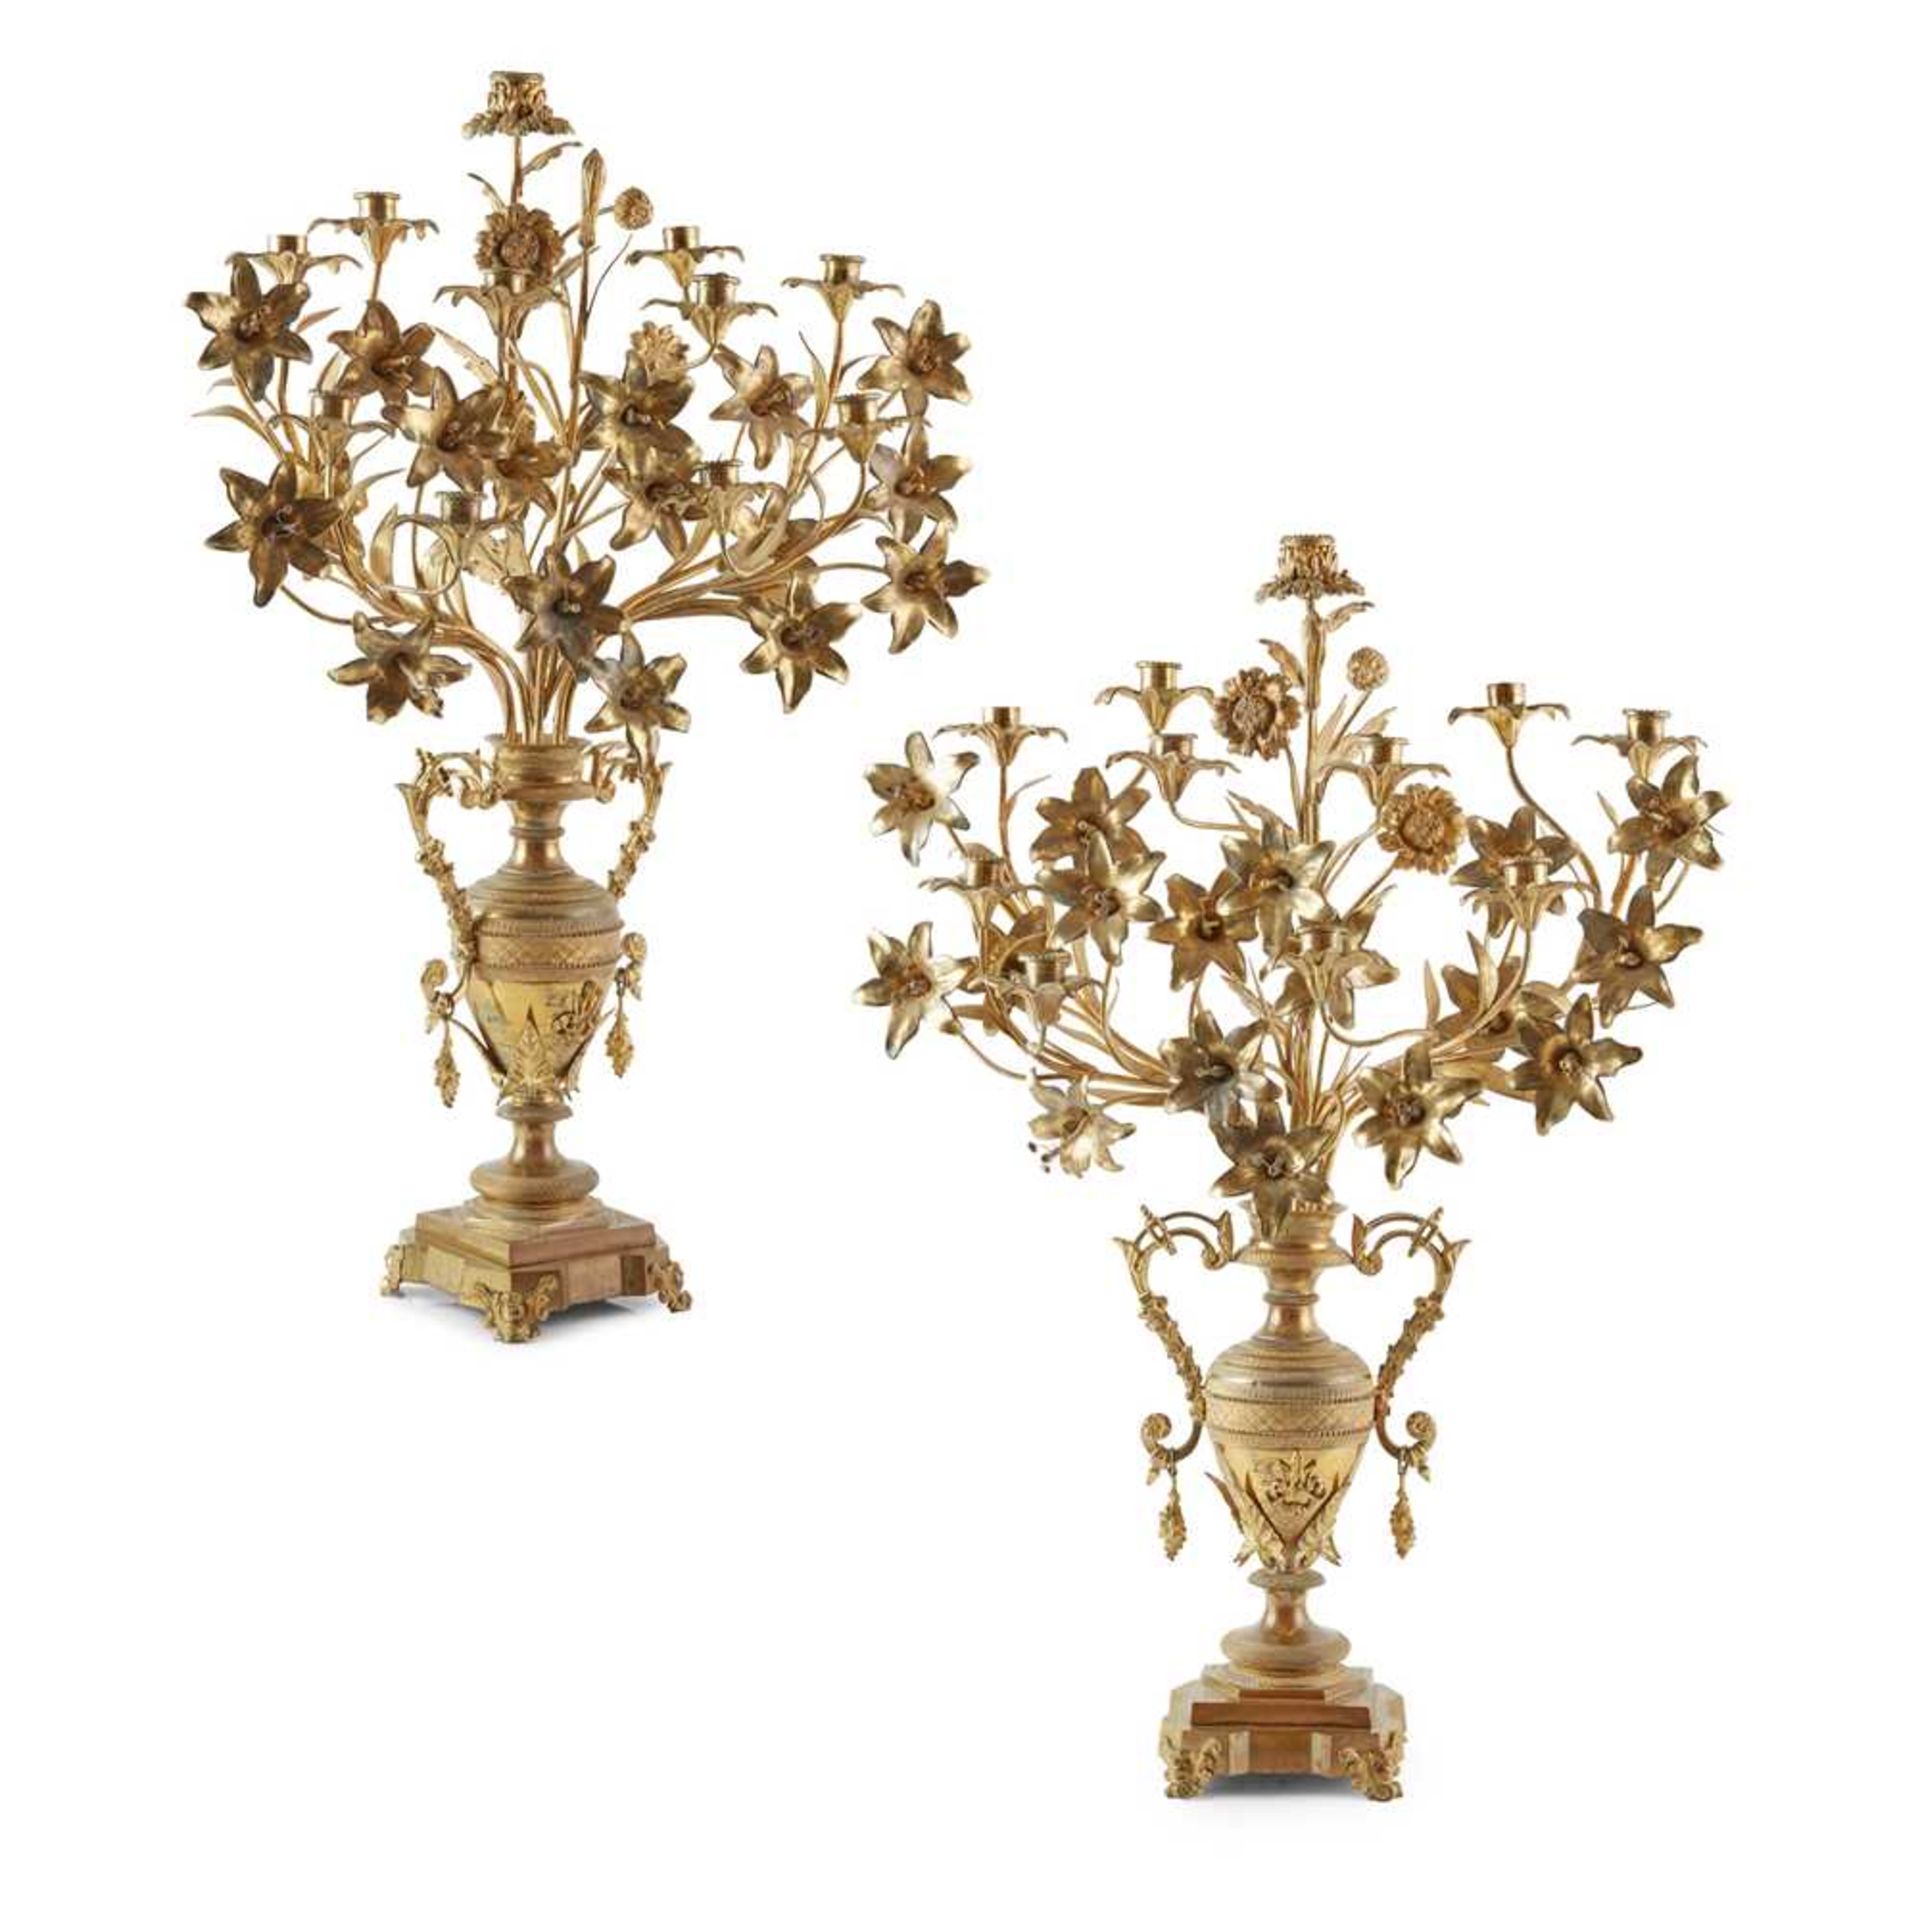 PAIR OF FRENCH LARGE GILT METAL CANDELABRA 19TH CENTURY